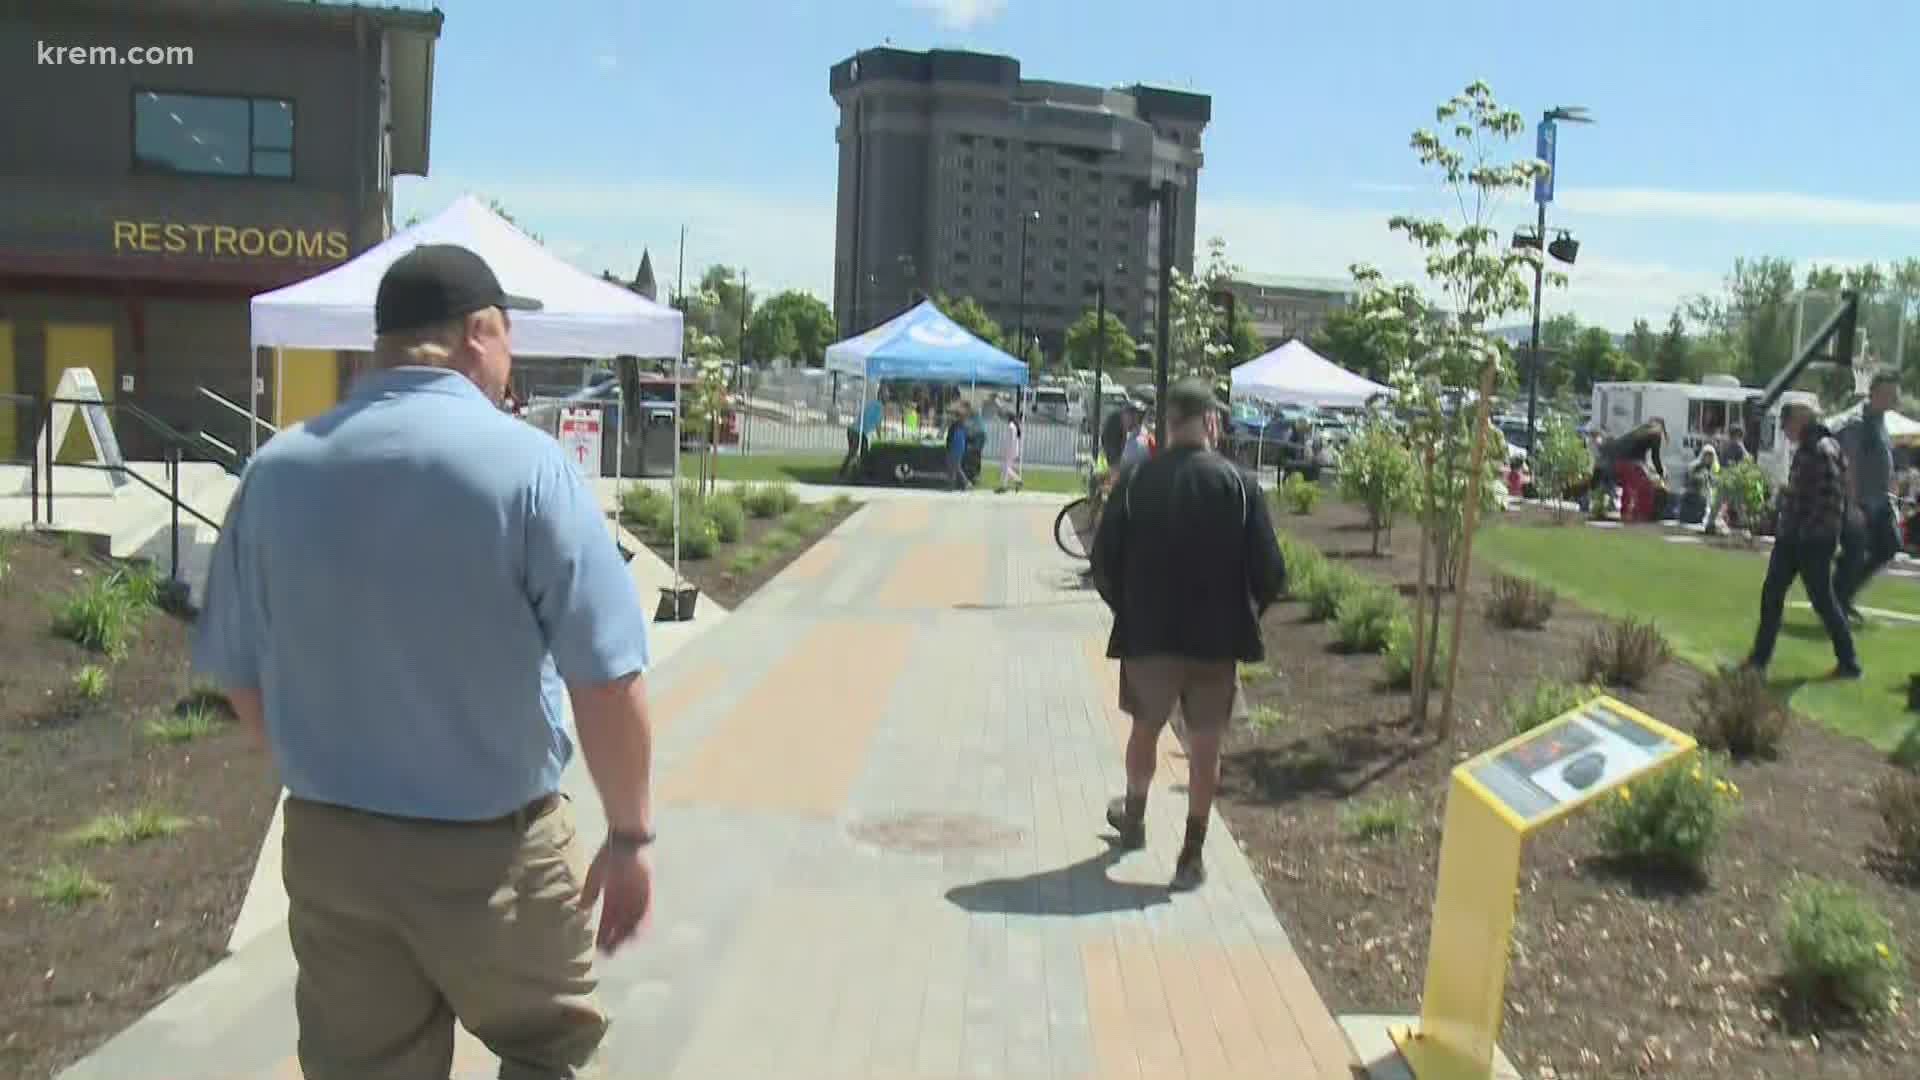 The five-year revitalization process is wrapping up as the Spokane Parks and Recreation unveils the North Bank of Riverfront Park on Friday.